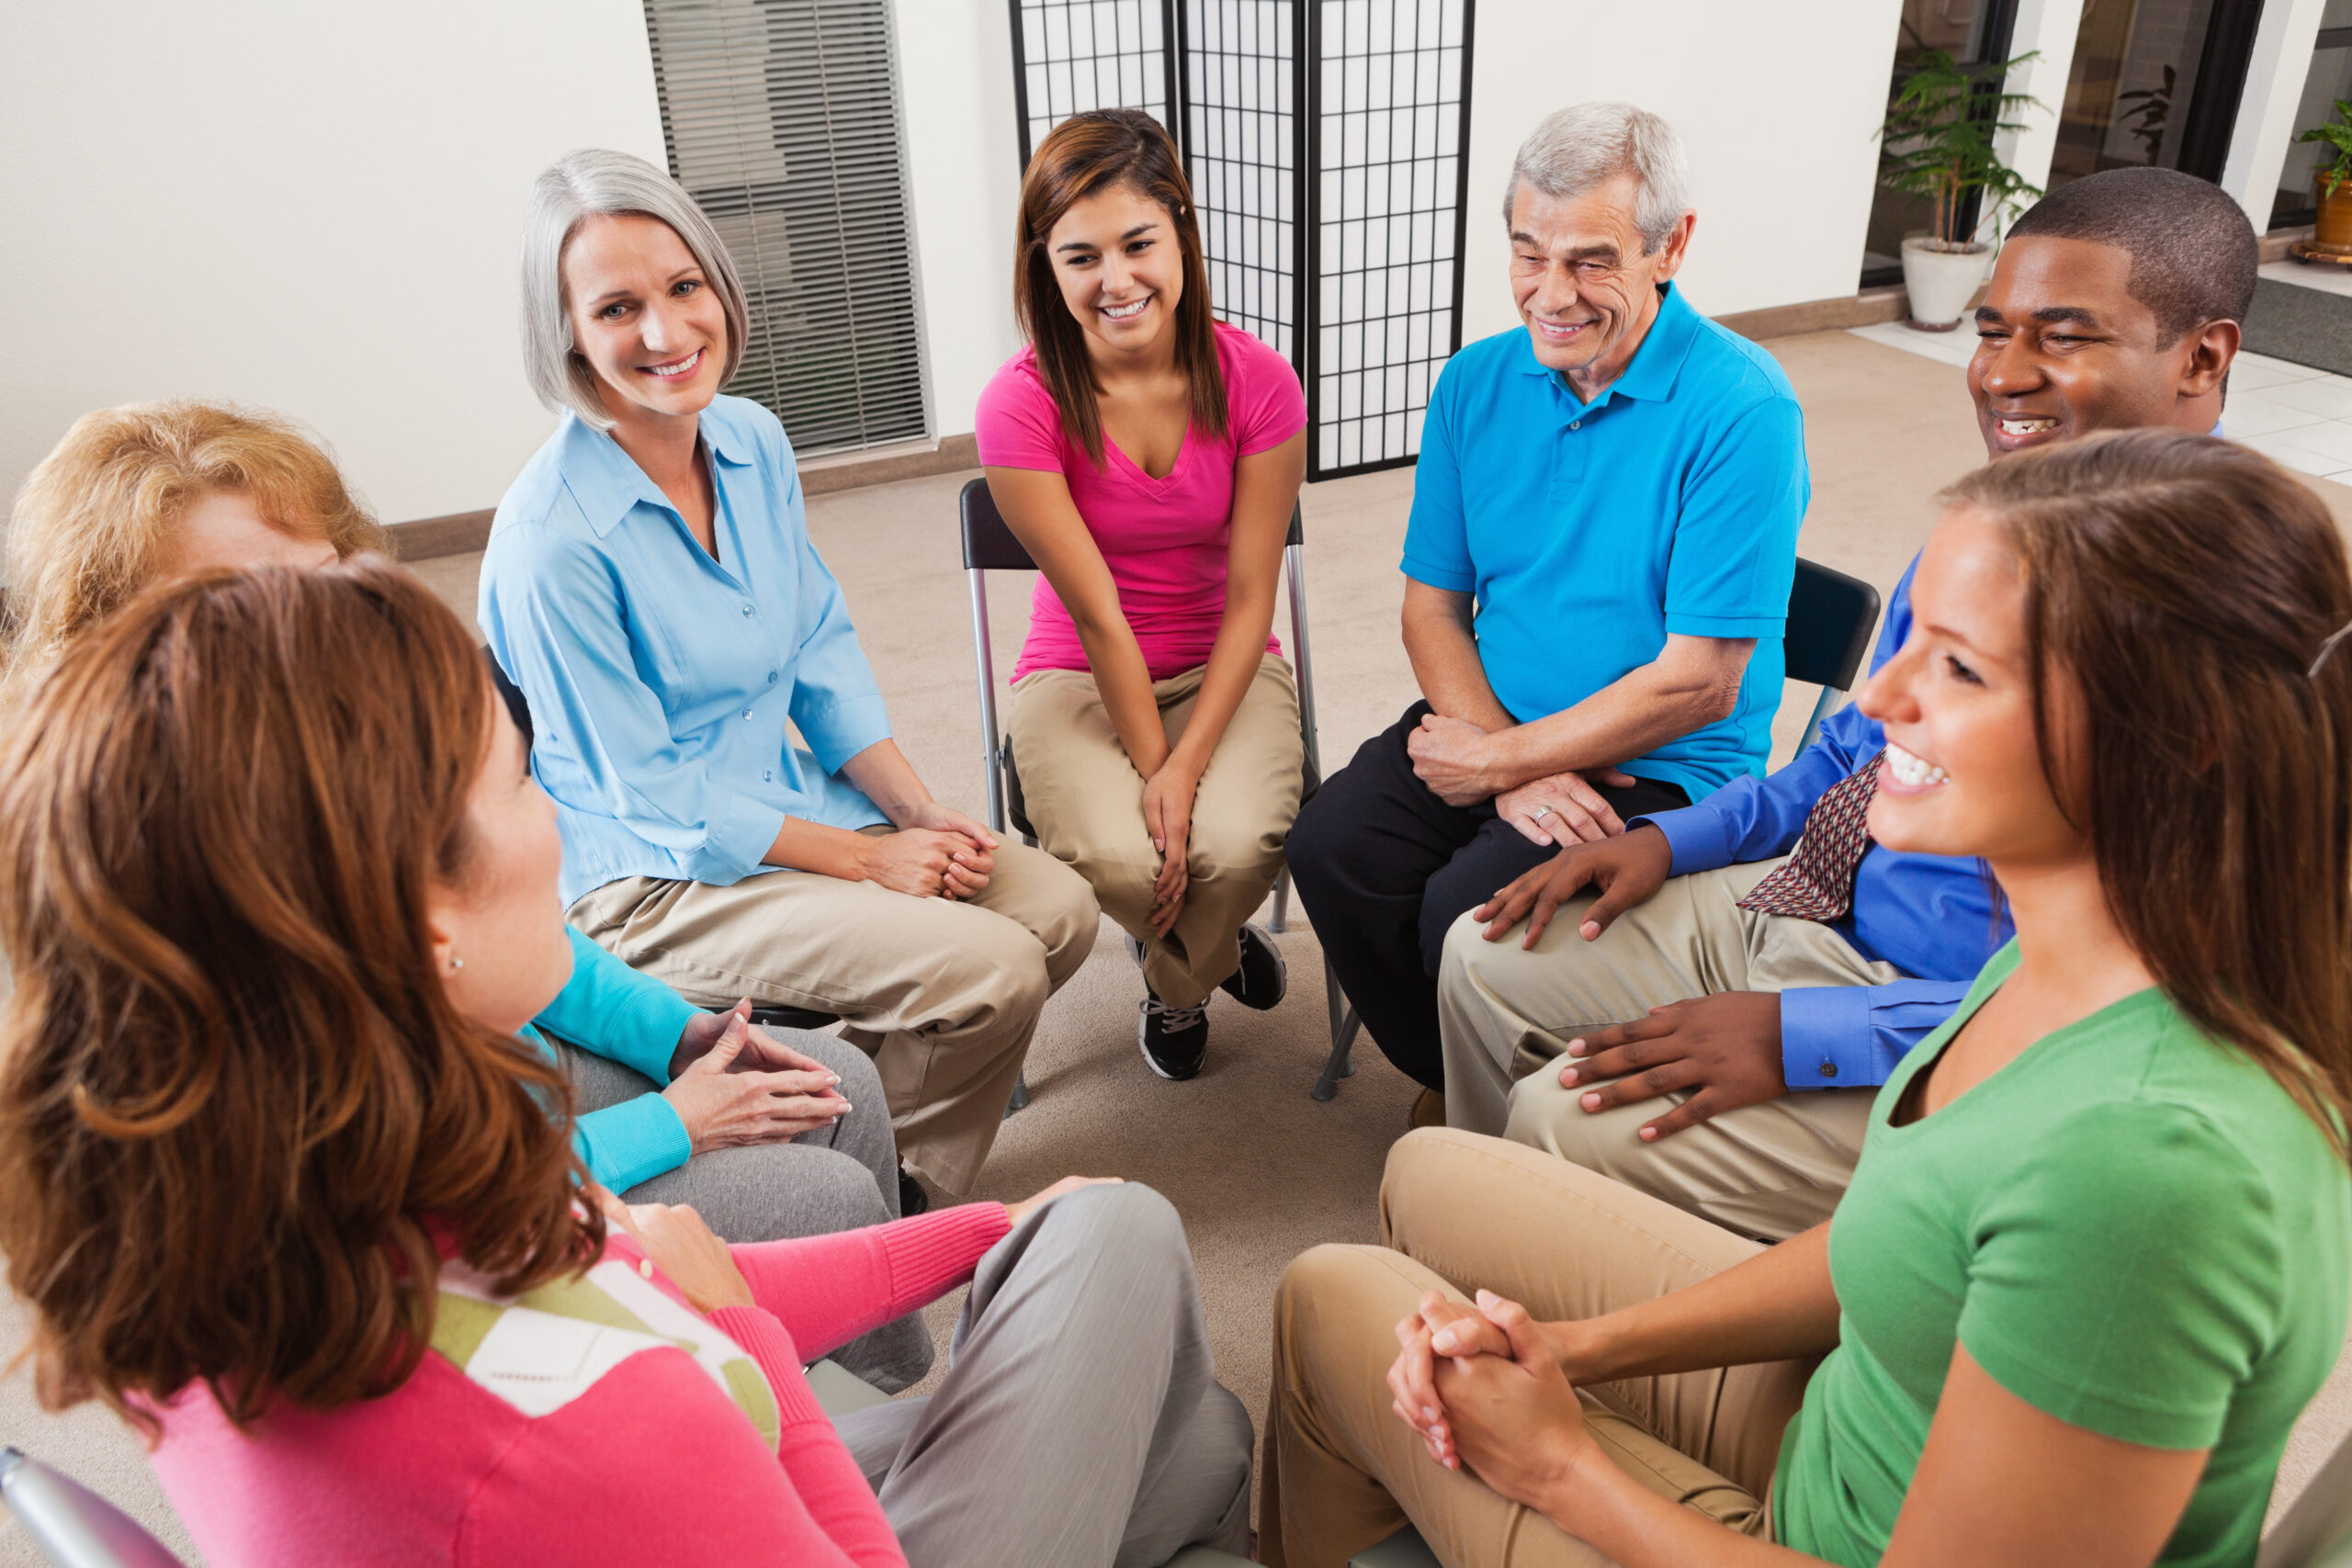 Diverse support group listening to friend tell story during discussion